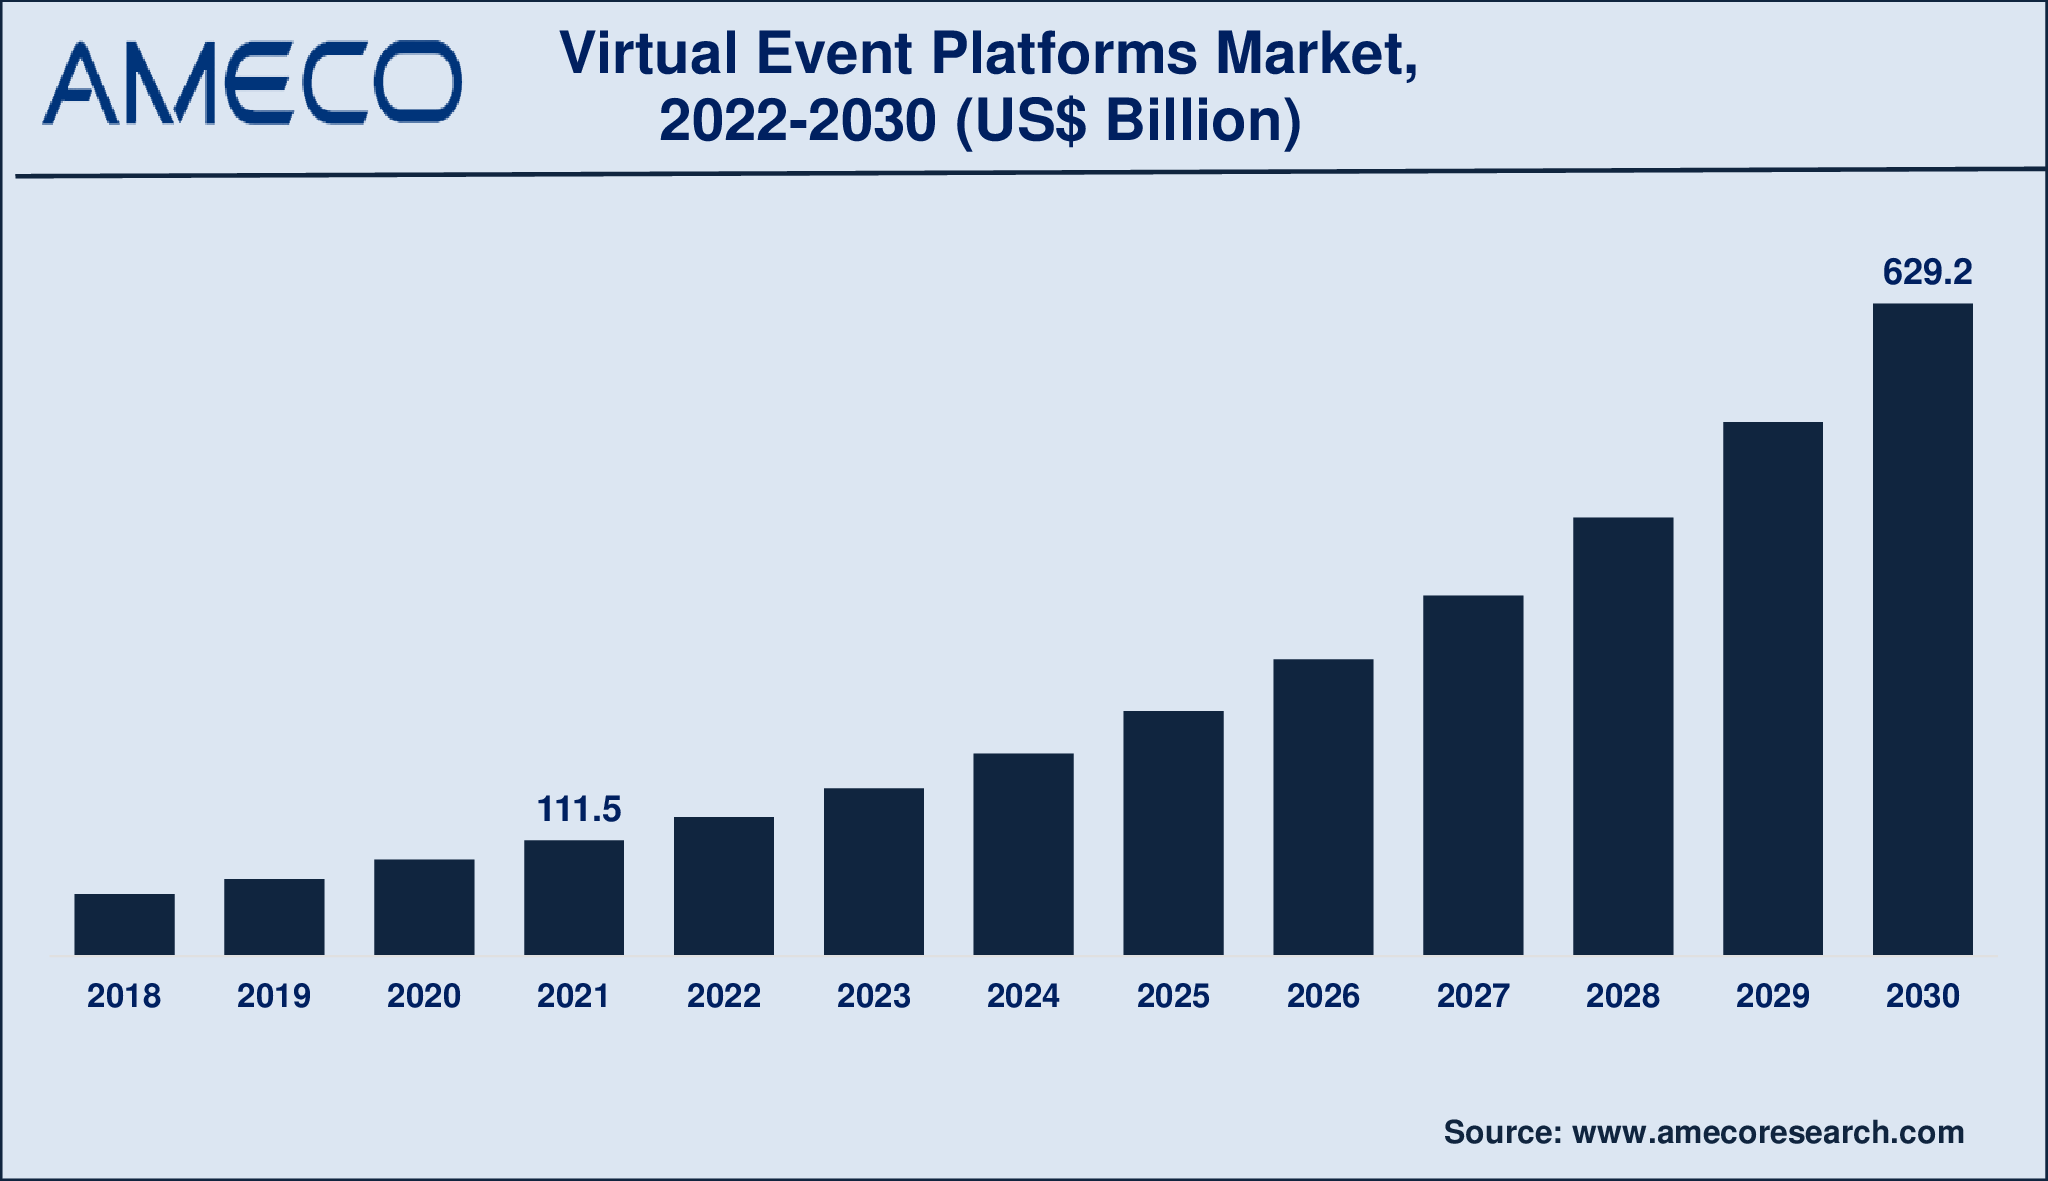 Virtual Event Platforms Market Size, Share, Growth, Trends, and Forecast 2022-2030